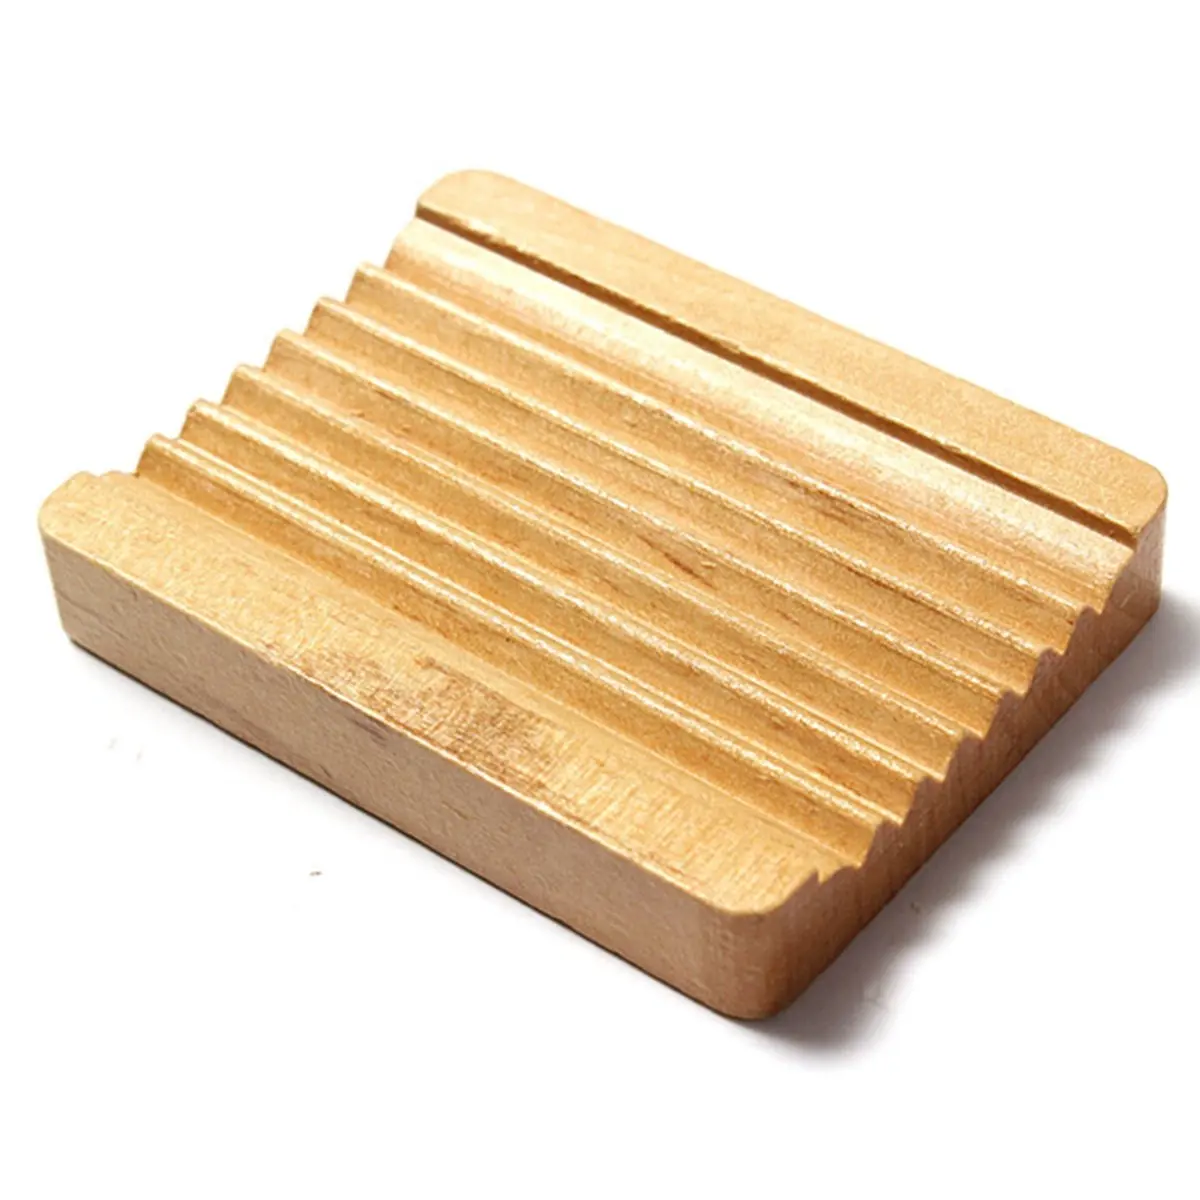 

BMBY-Trapezoid Natural Wood Soap Tray Holder Plate Dish Box Case Storage Shower 10X7.5cm